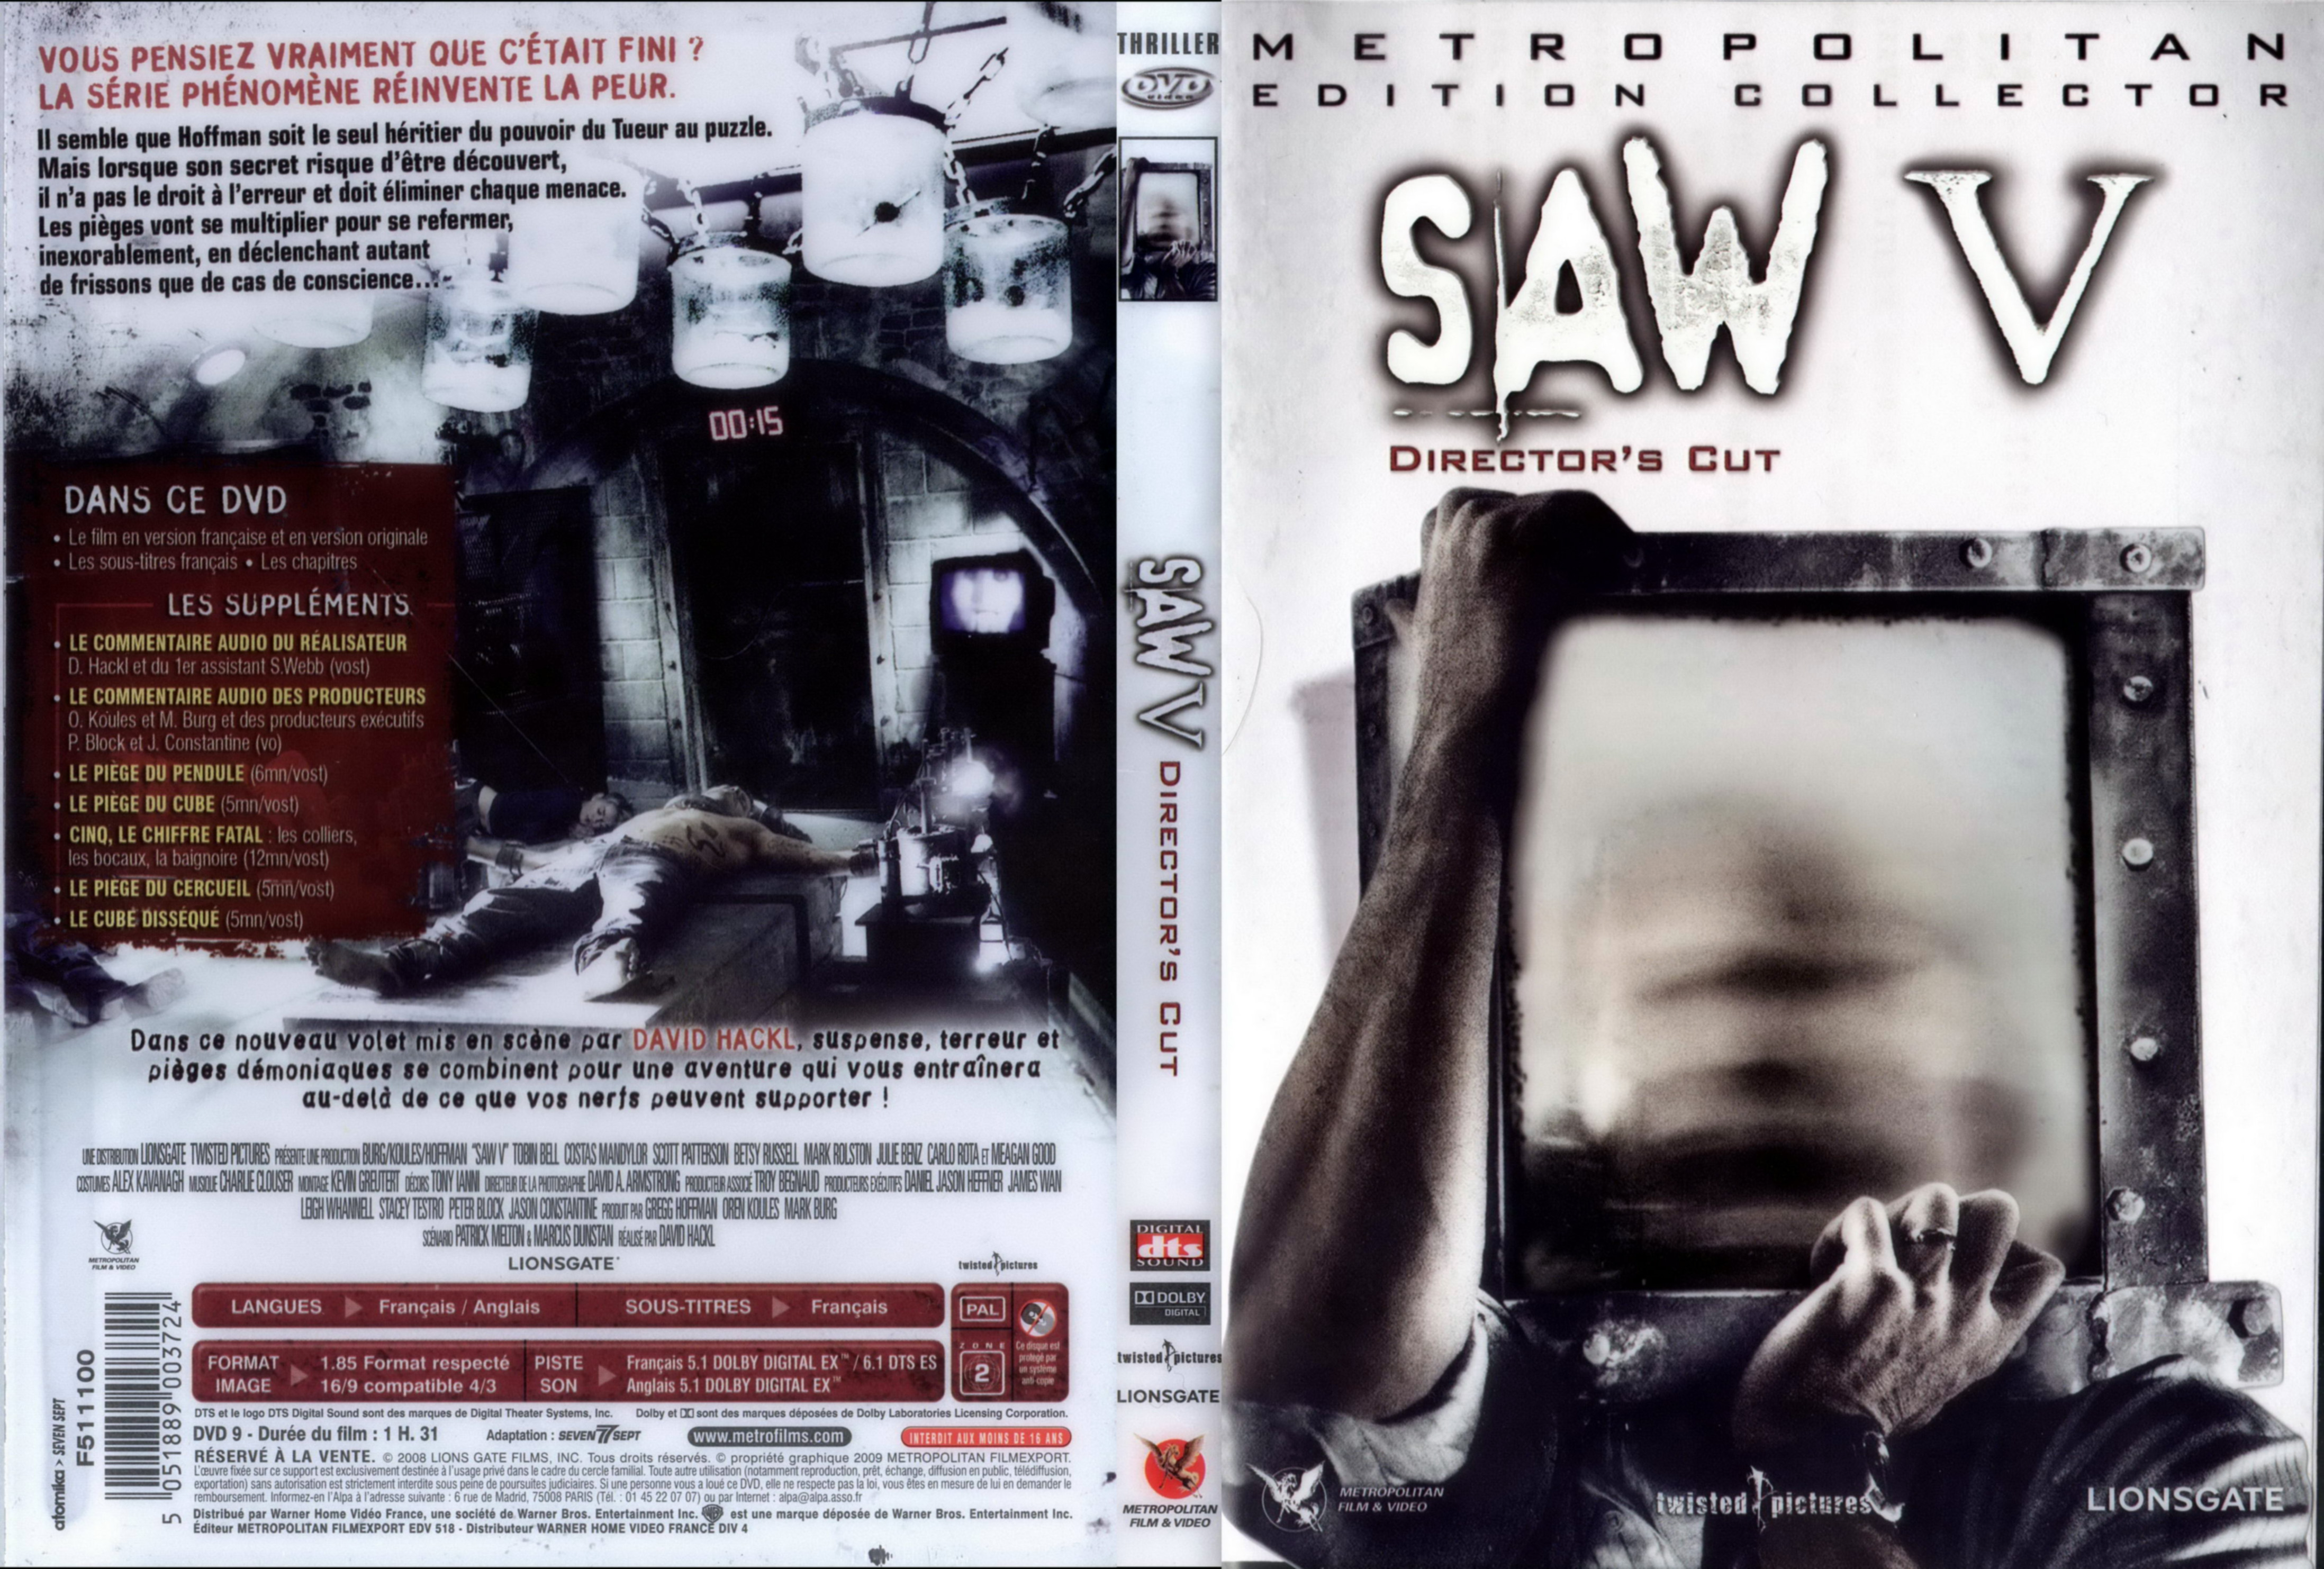 Jaquette DVD Saw 5